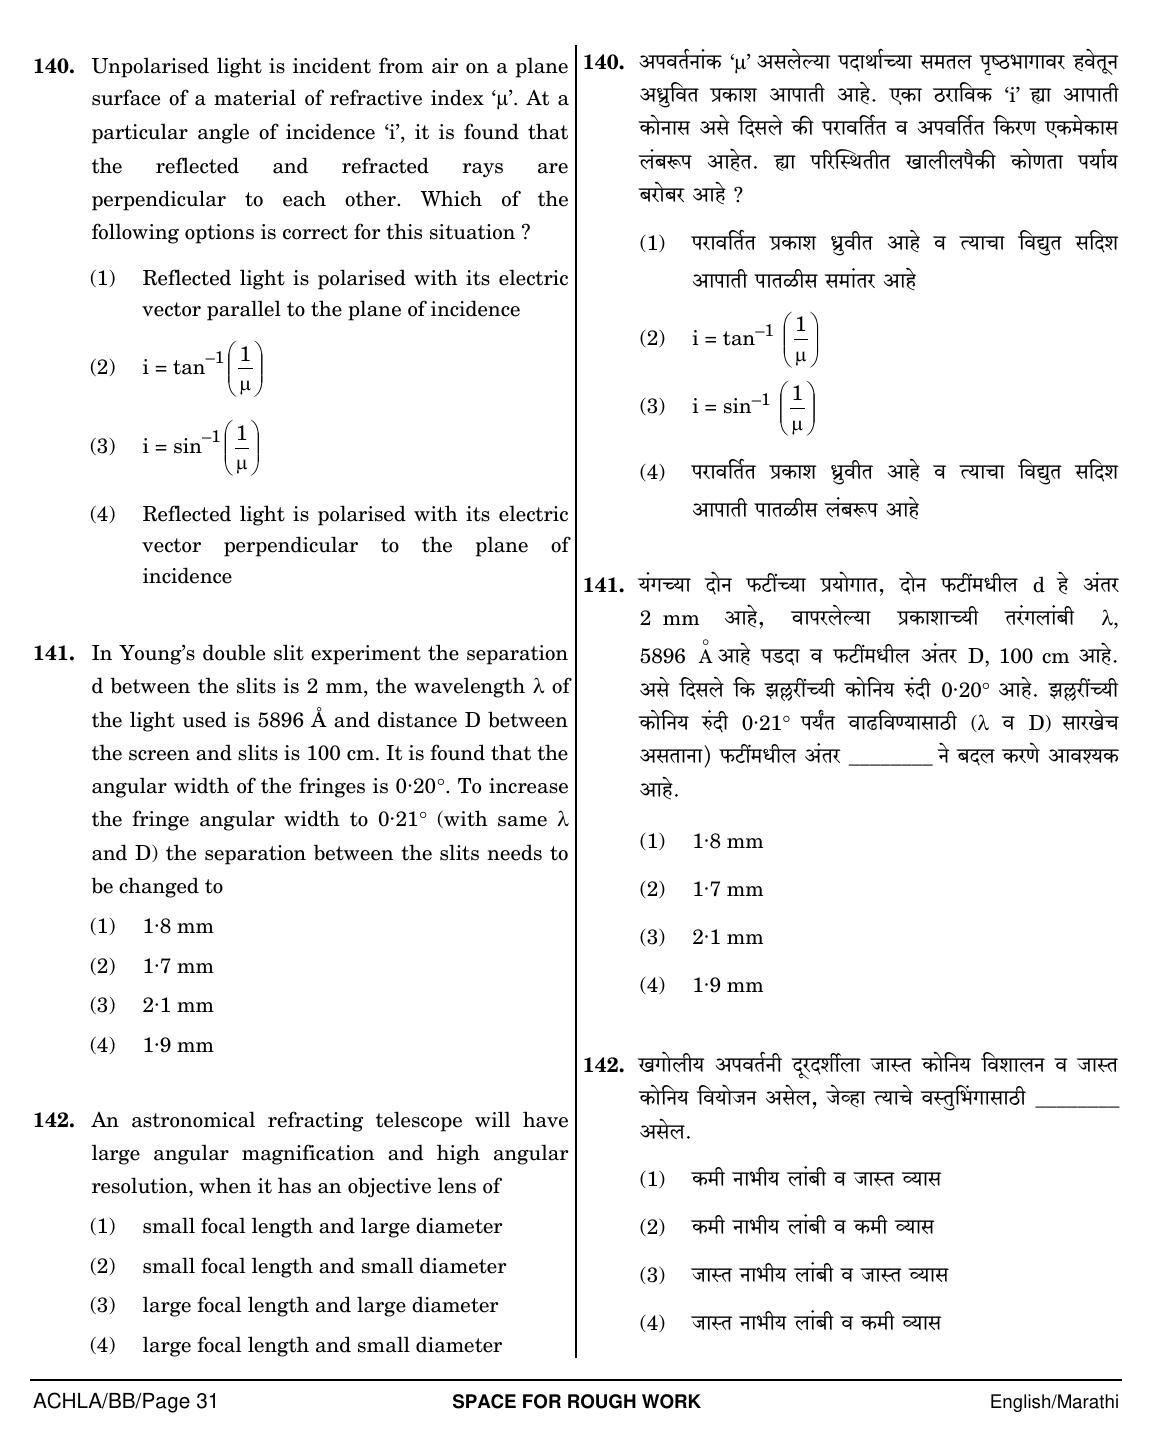 NEET Marathi BB 2018 Question Paper - Page 31